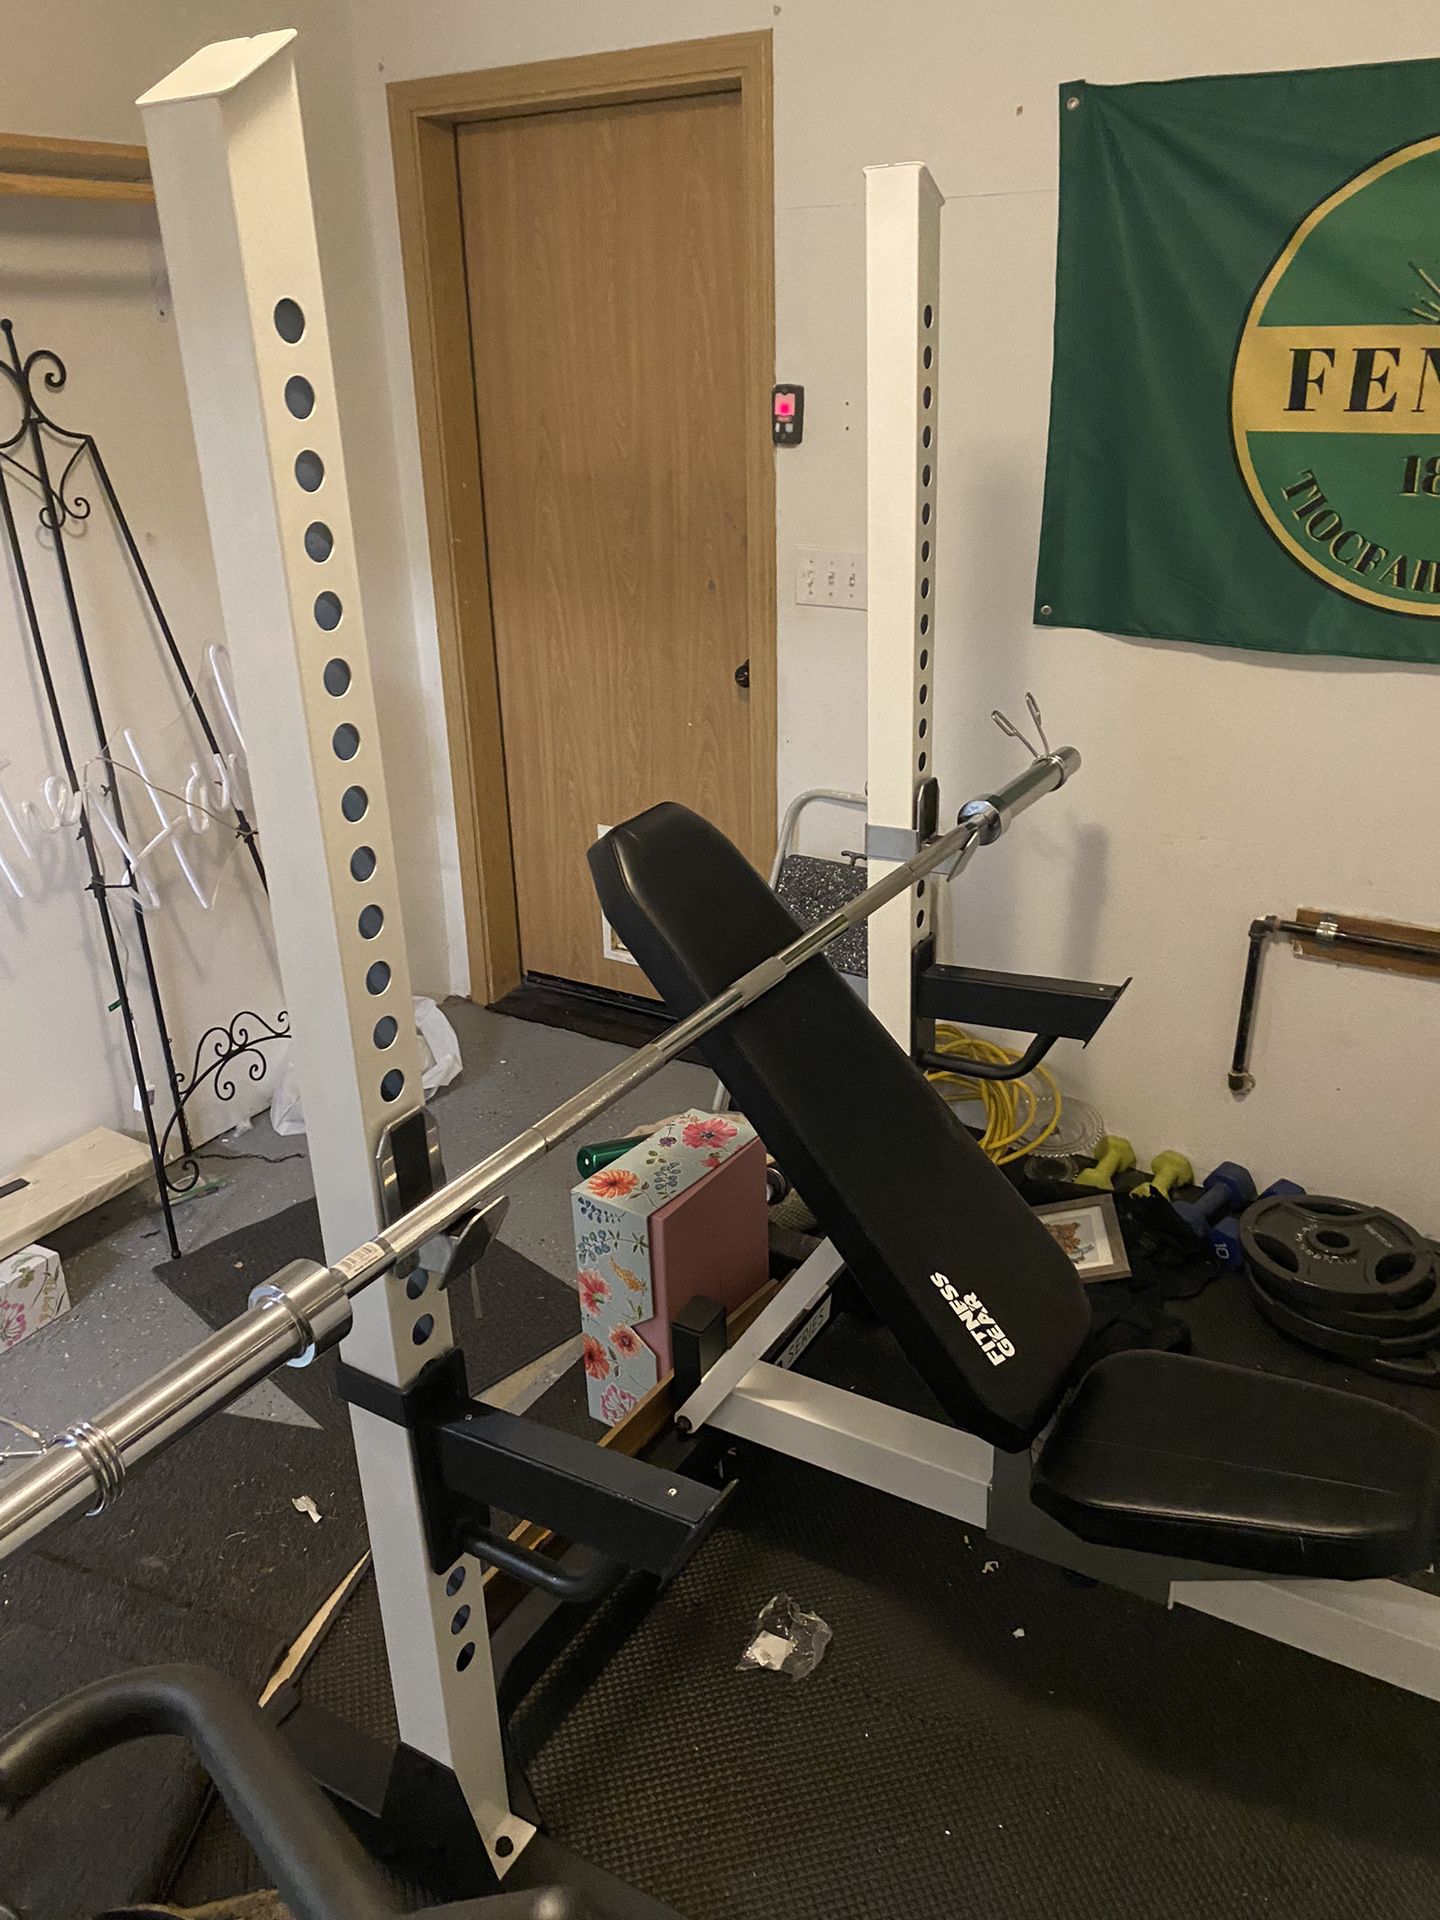 Like New Bench Press With Bar And Plates